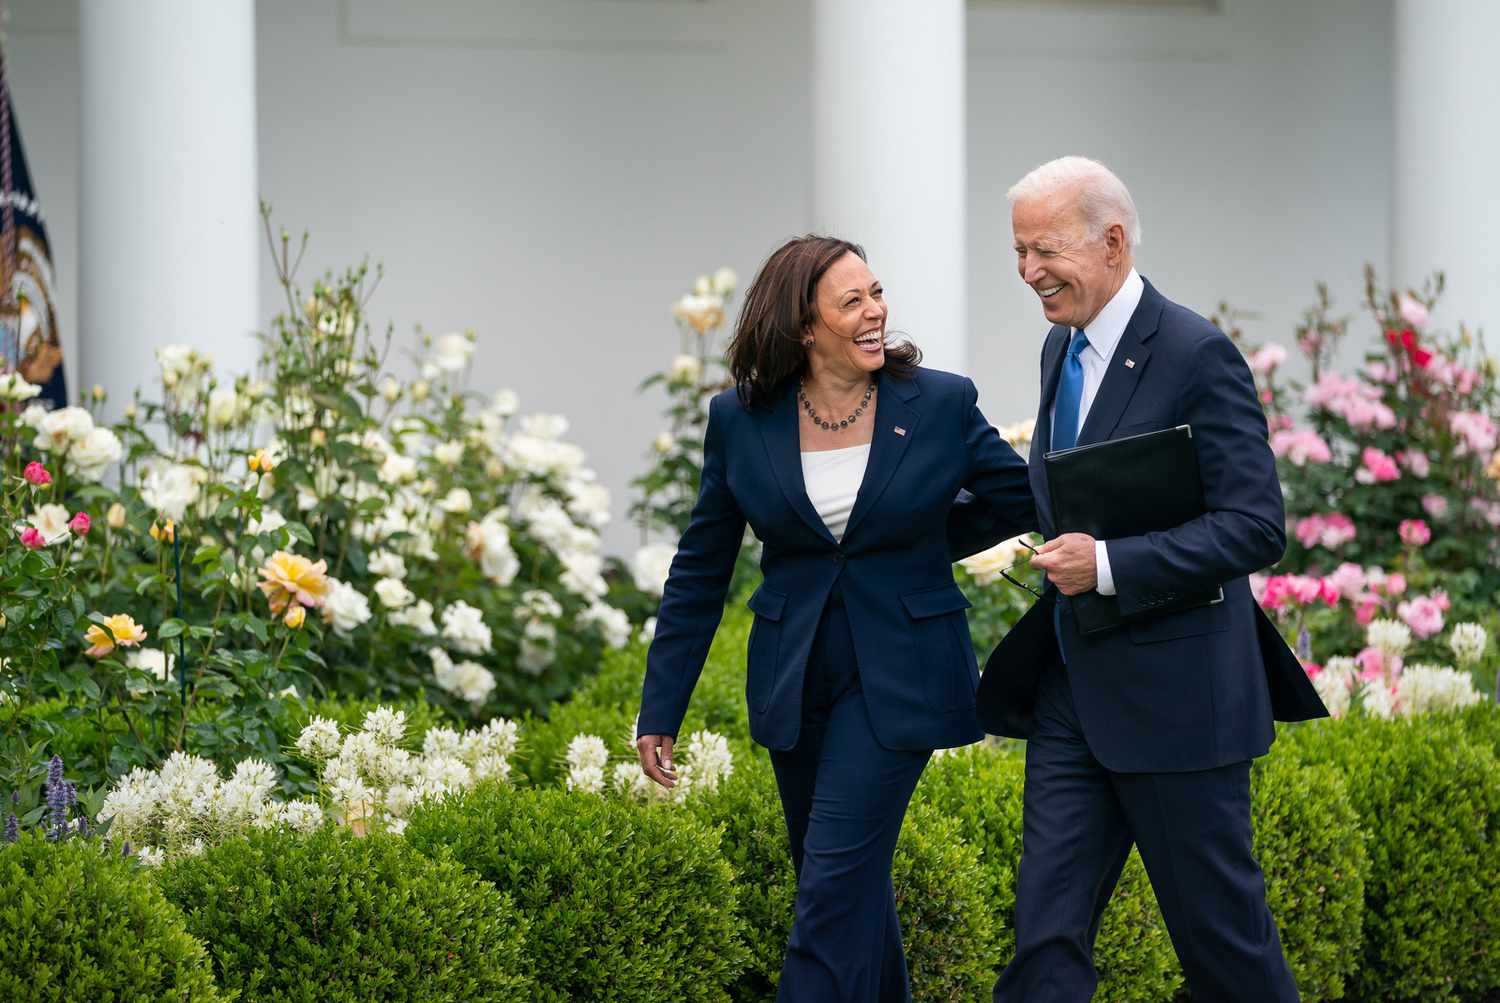 President Joe Biden, joined by Vice President Kamala Harris, after delivering remarks on the CDC’s updated guidance on mask wearing for vaccinated individuals Thursday, May 13, 2021, in the Rose Garden of the White House.